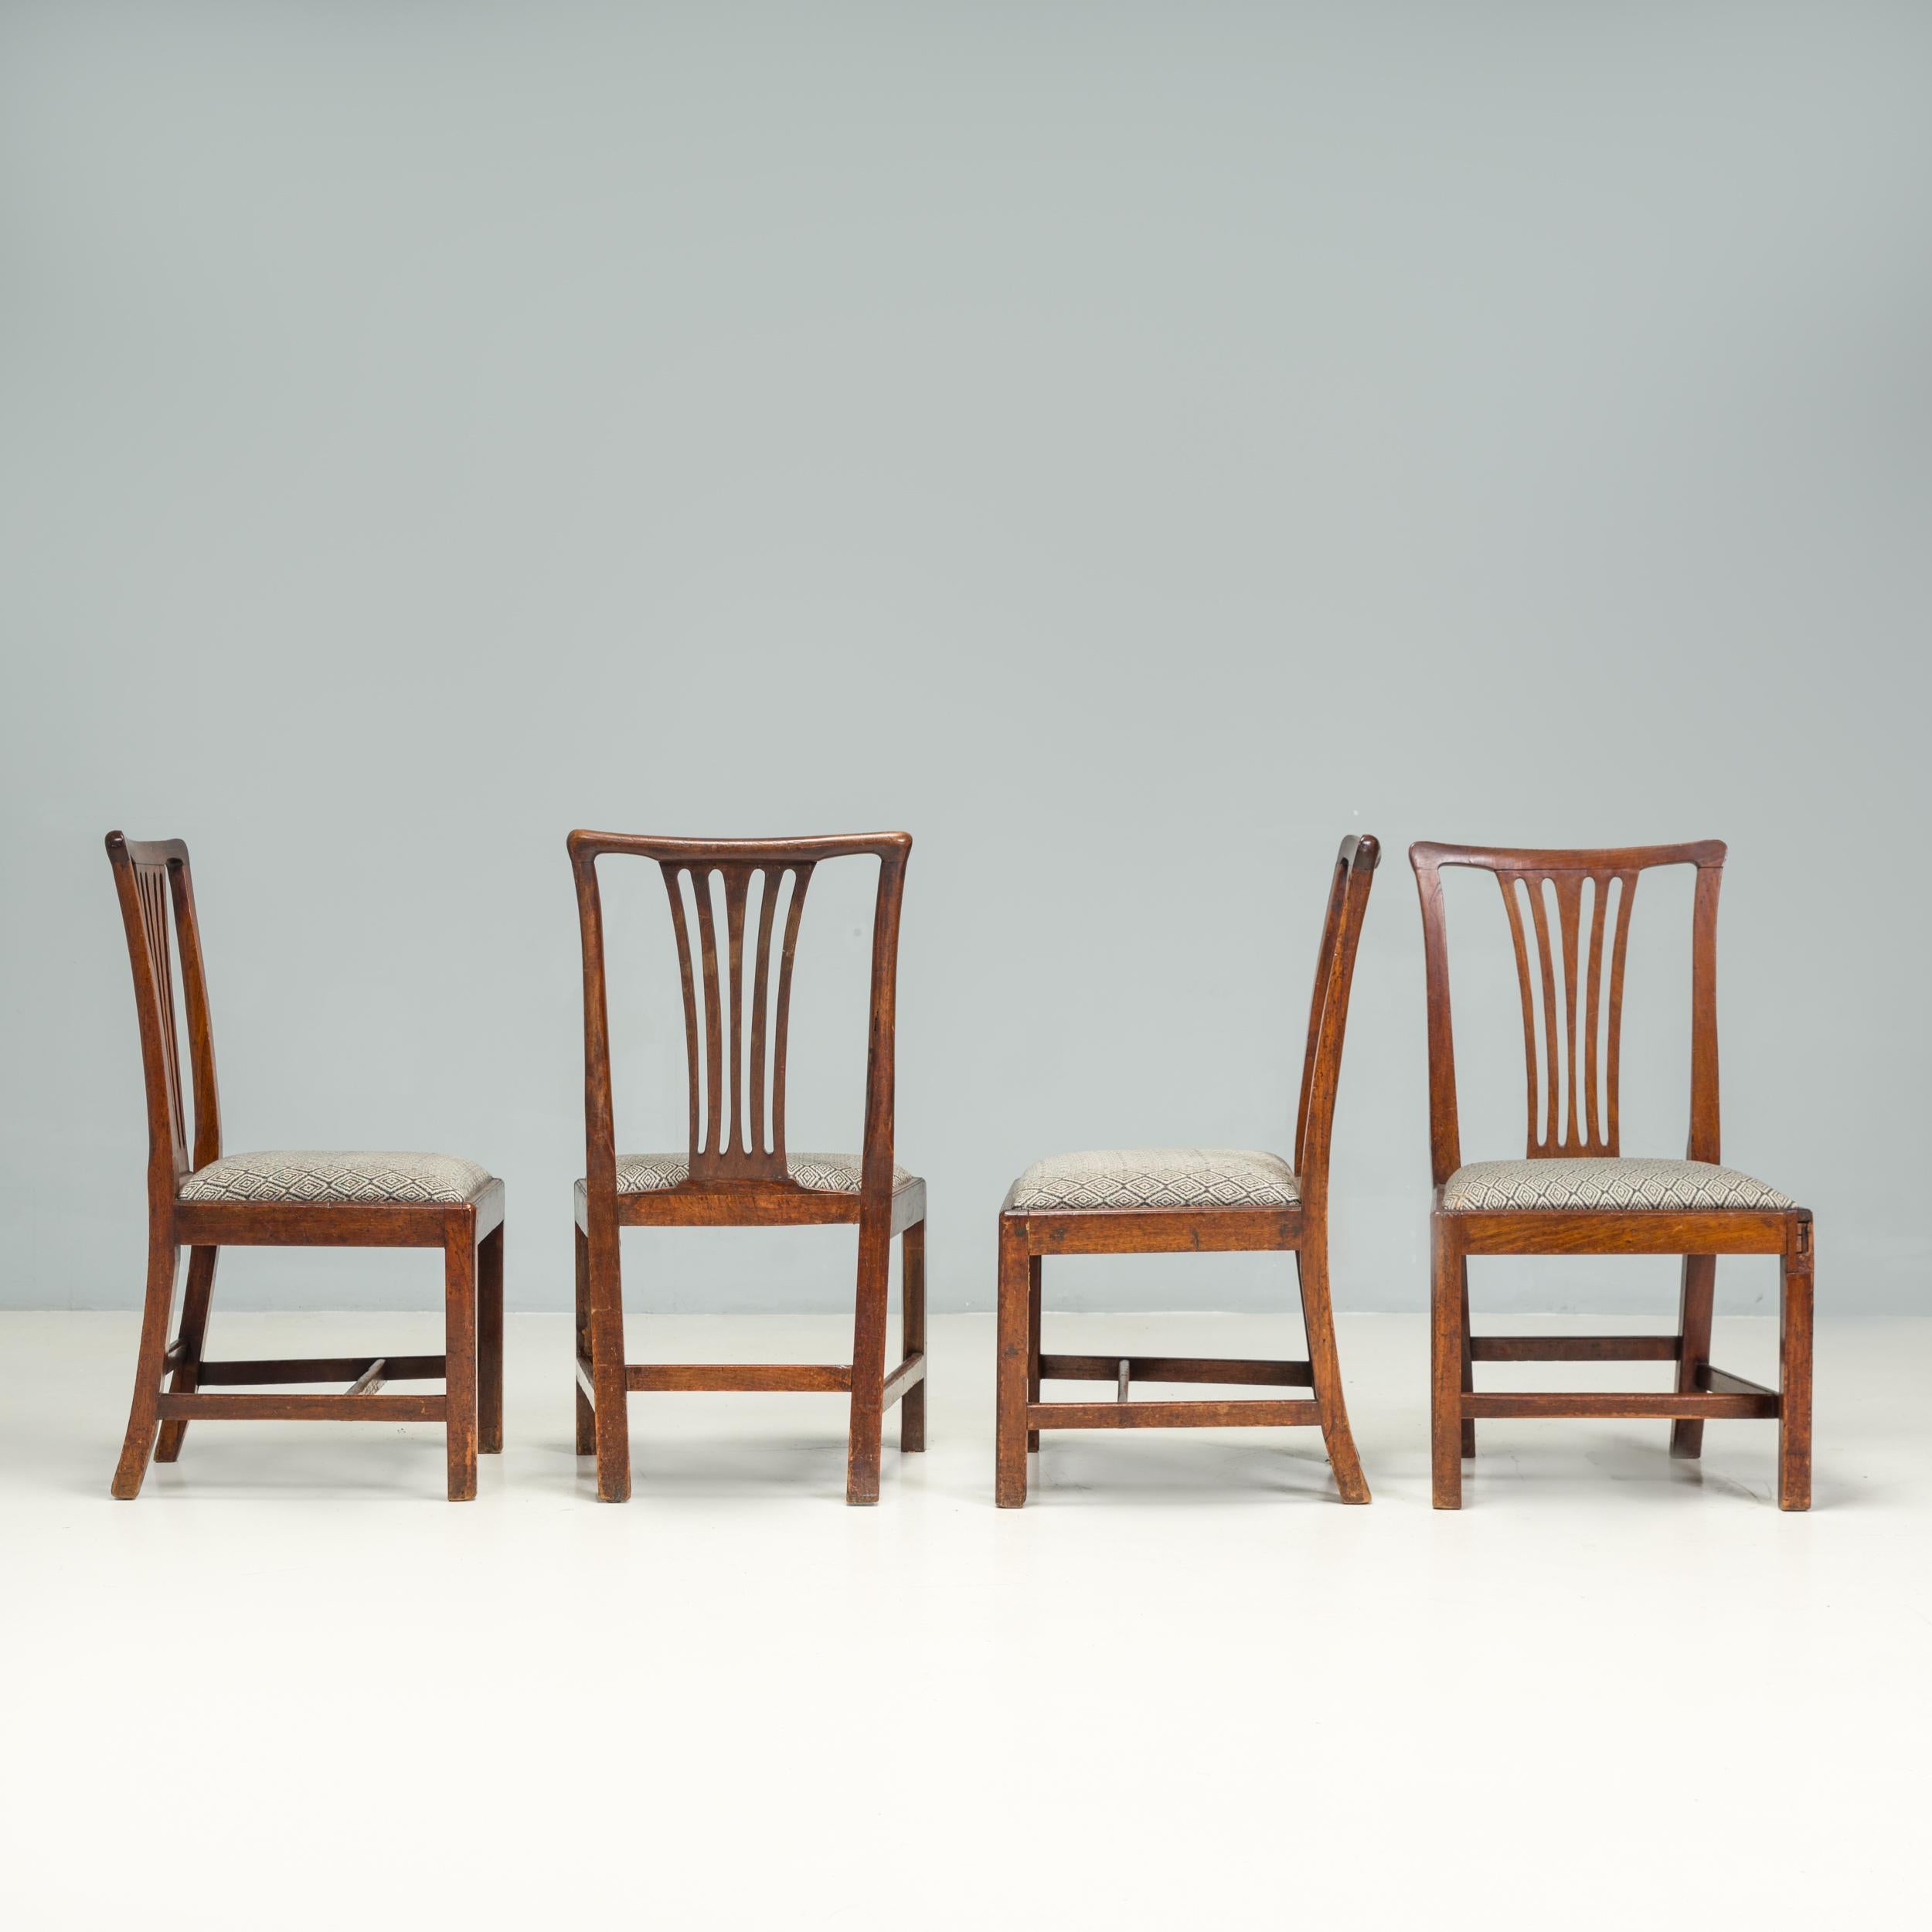 European Chippendale Style Wooden Dining Chairs, Set of 4